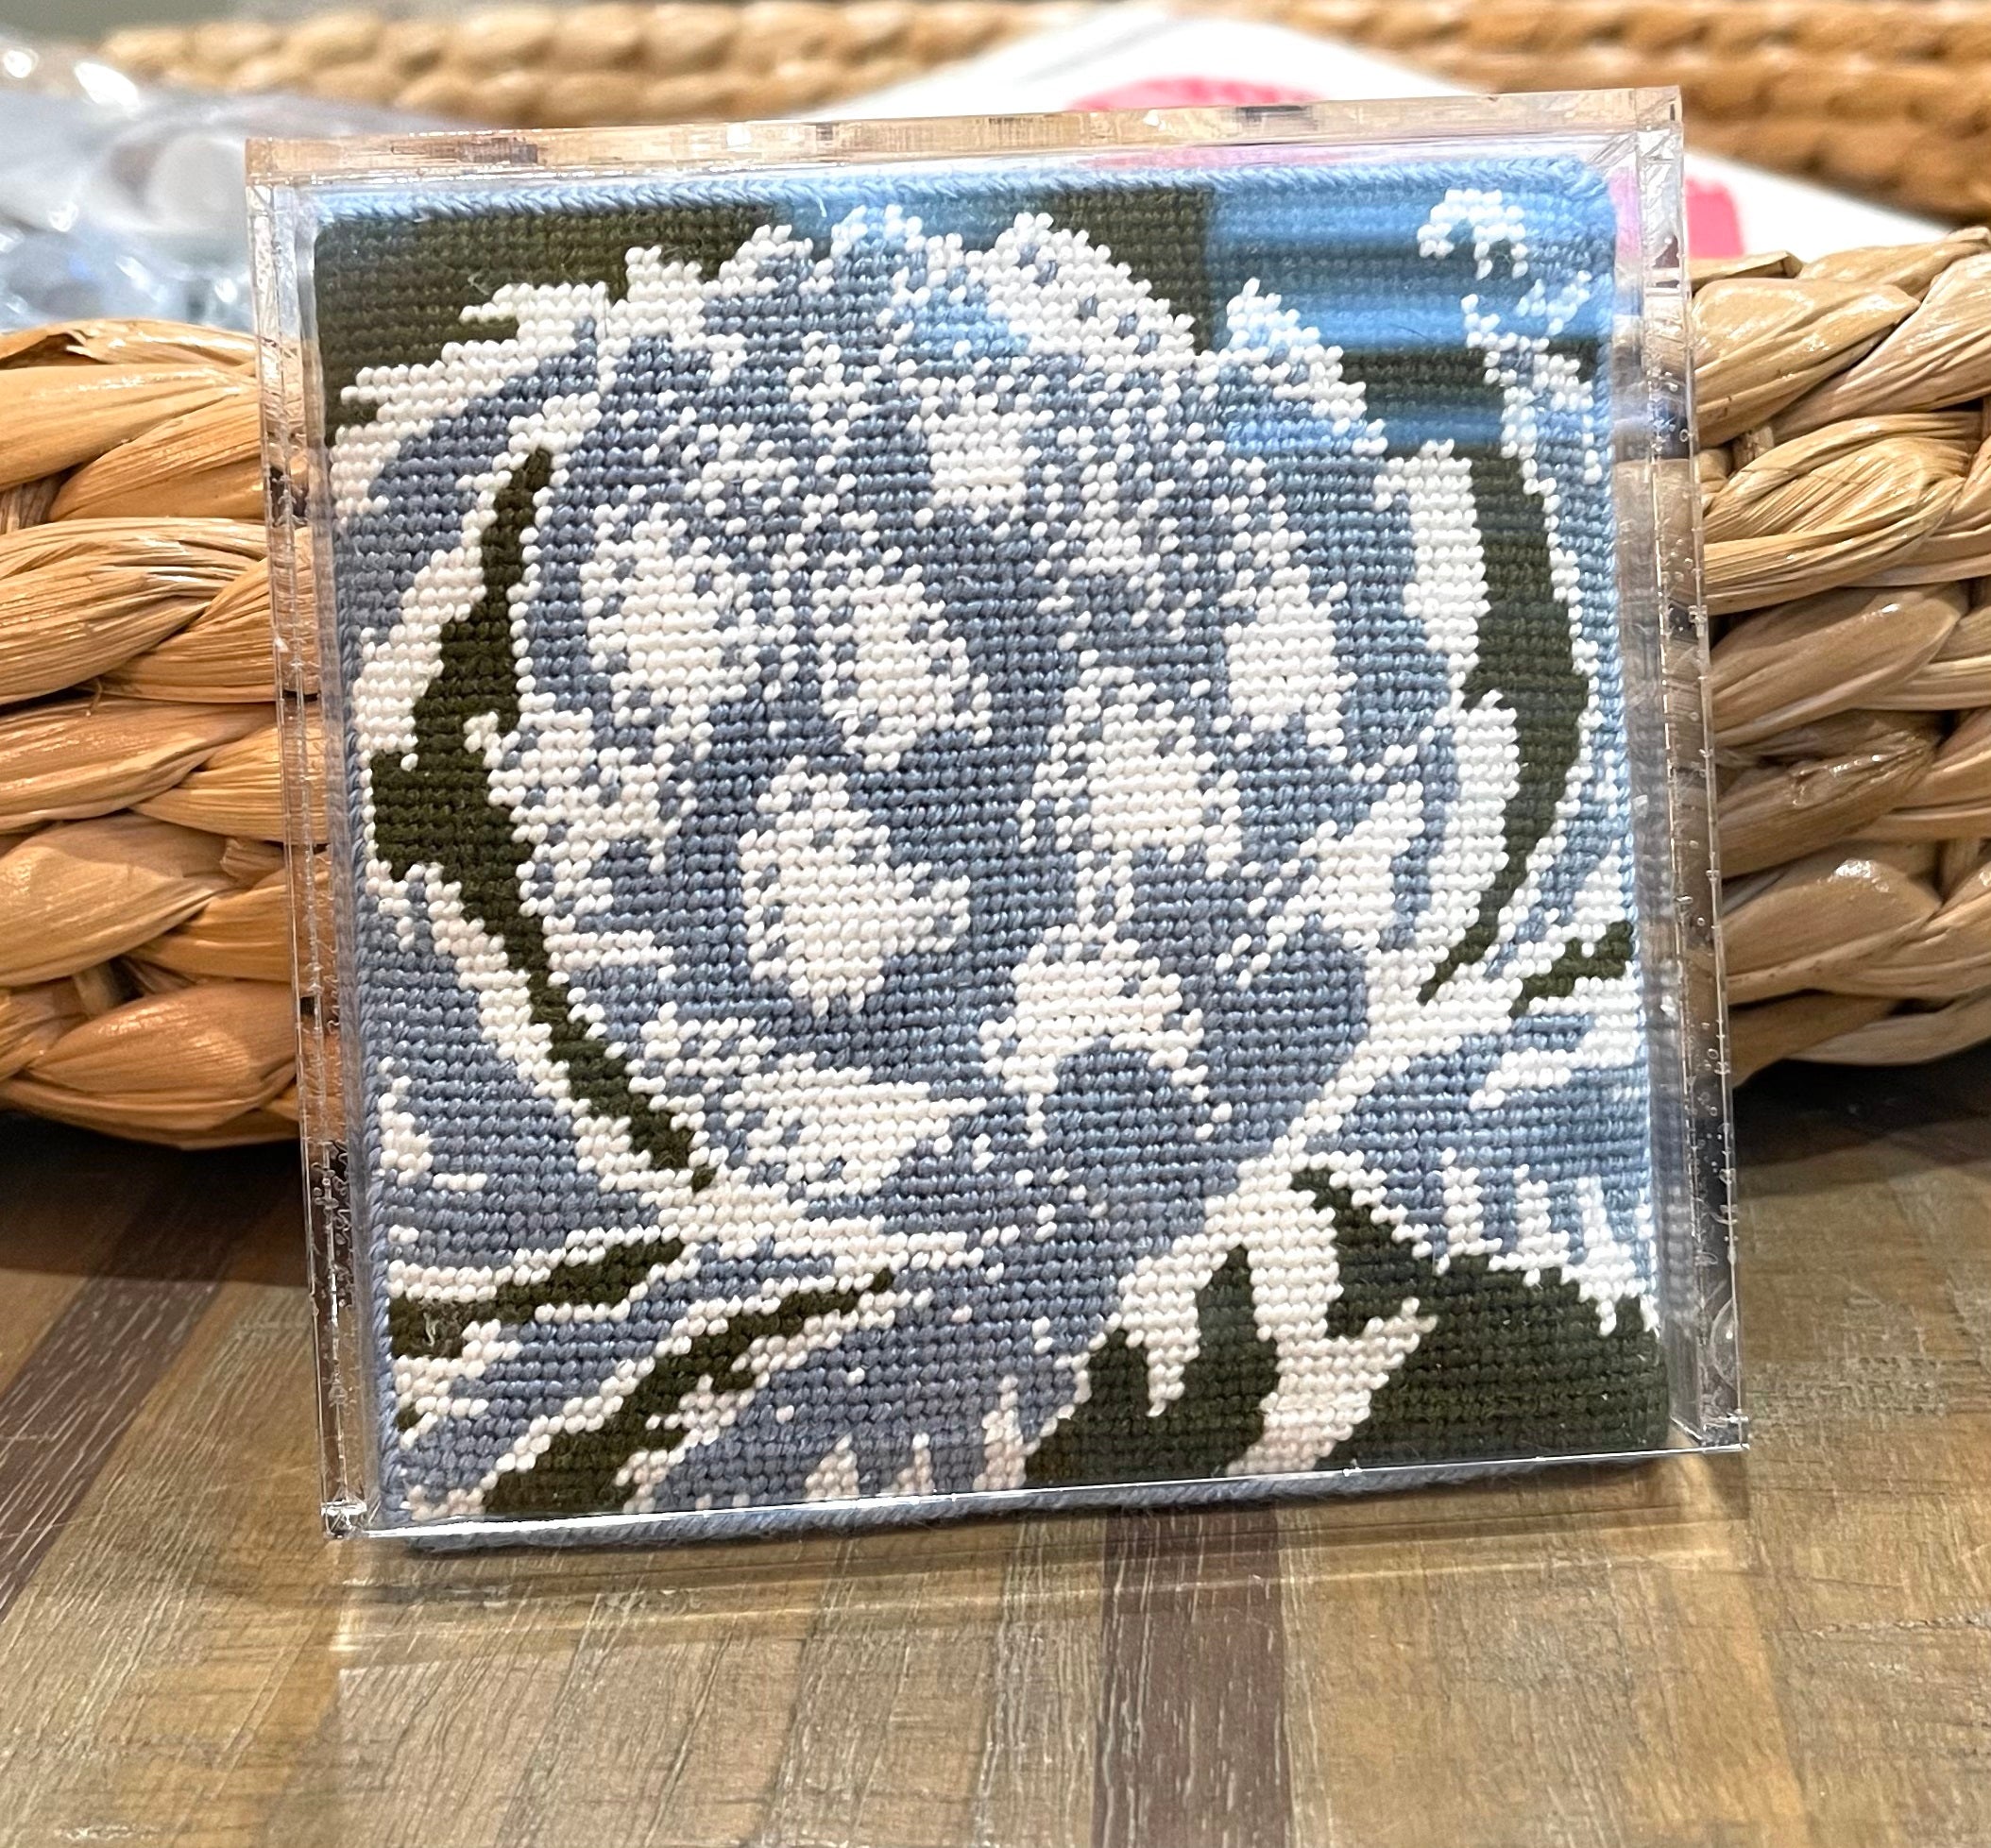 4 by 4 acrylic coaster only- 1/2 inch bottom opening- custom designed - Needlepoint by Laura